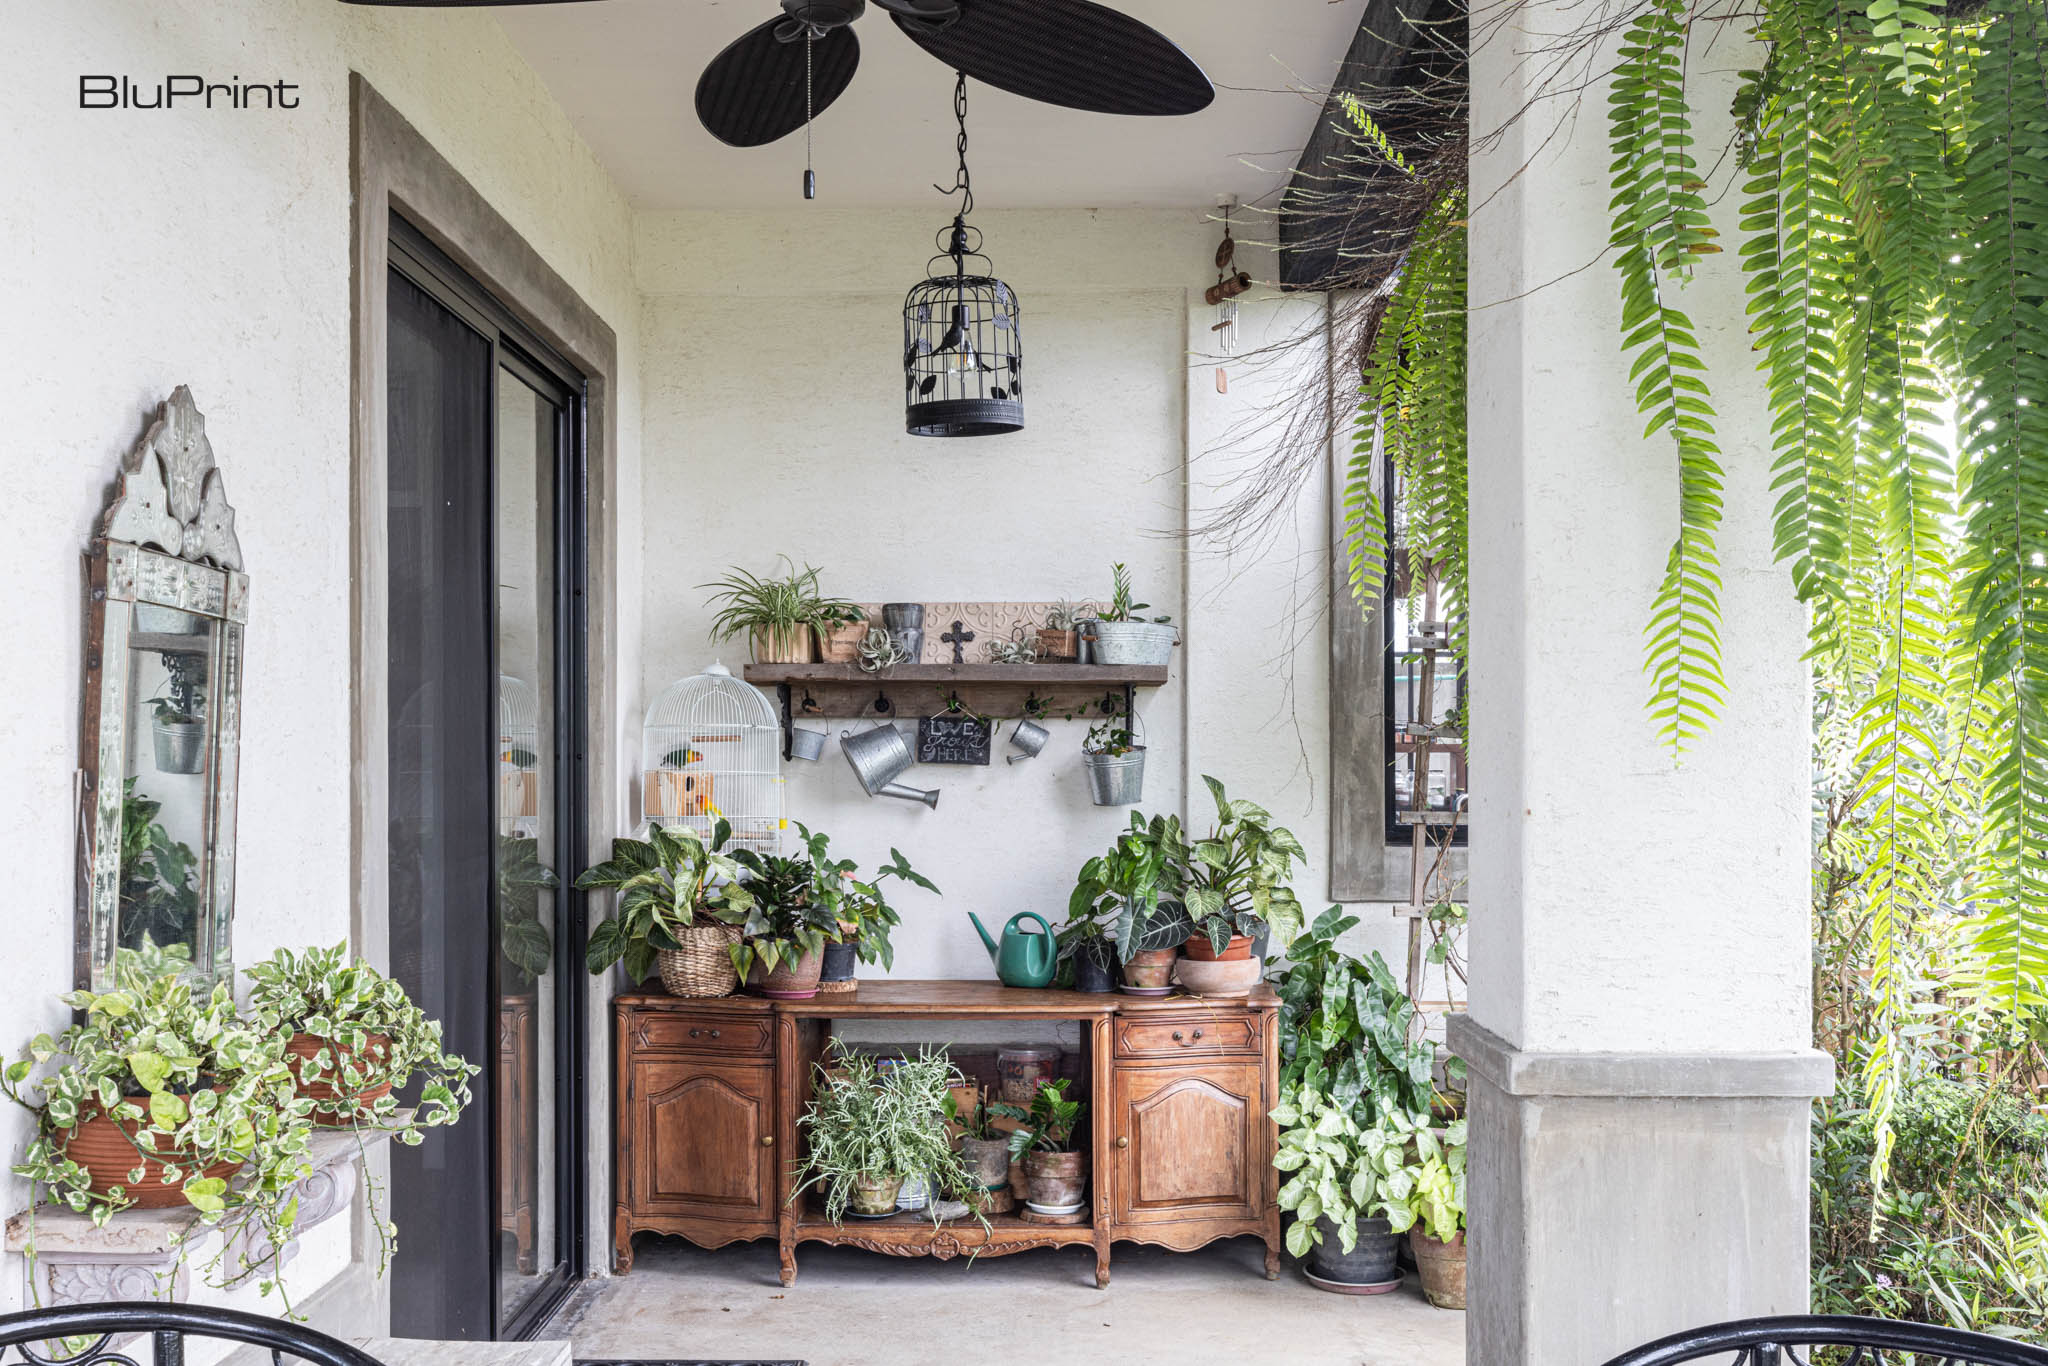 A modern home's outdoor lanai area with an antique wooden cabinet filled with plants. A black ceiling fan hangs above it.